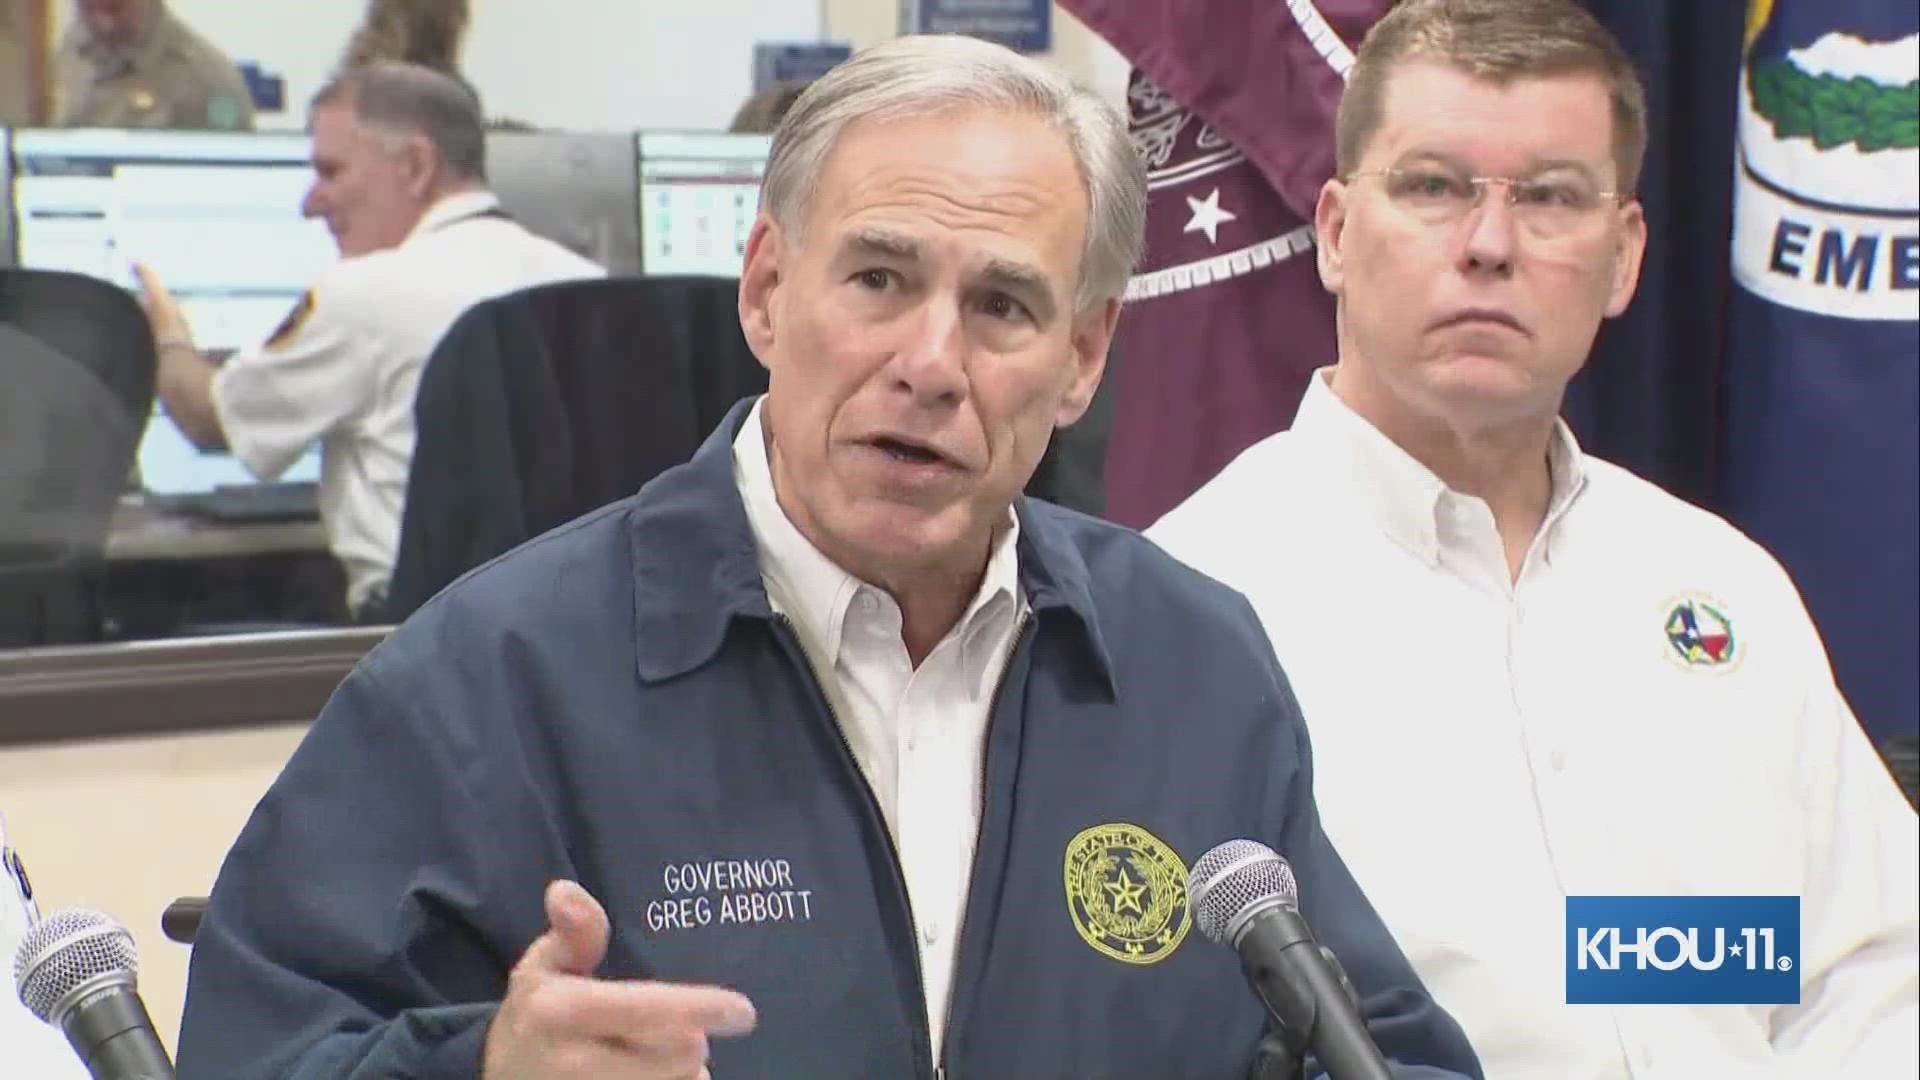 PUC Chairman Peter Lake, along with Gov. Greg Abbott, spoke about the power grid ahead the arctic blast later this week.